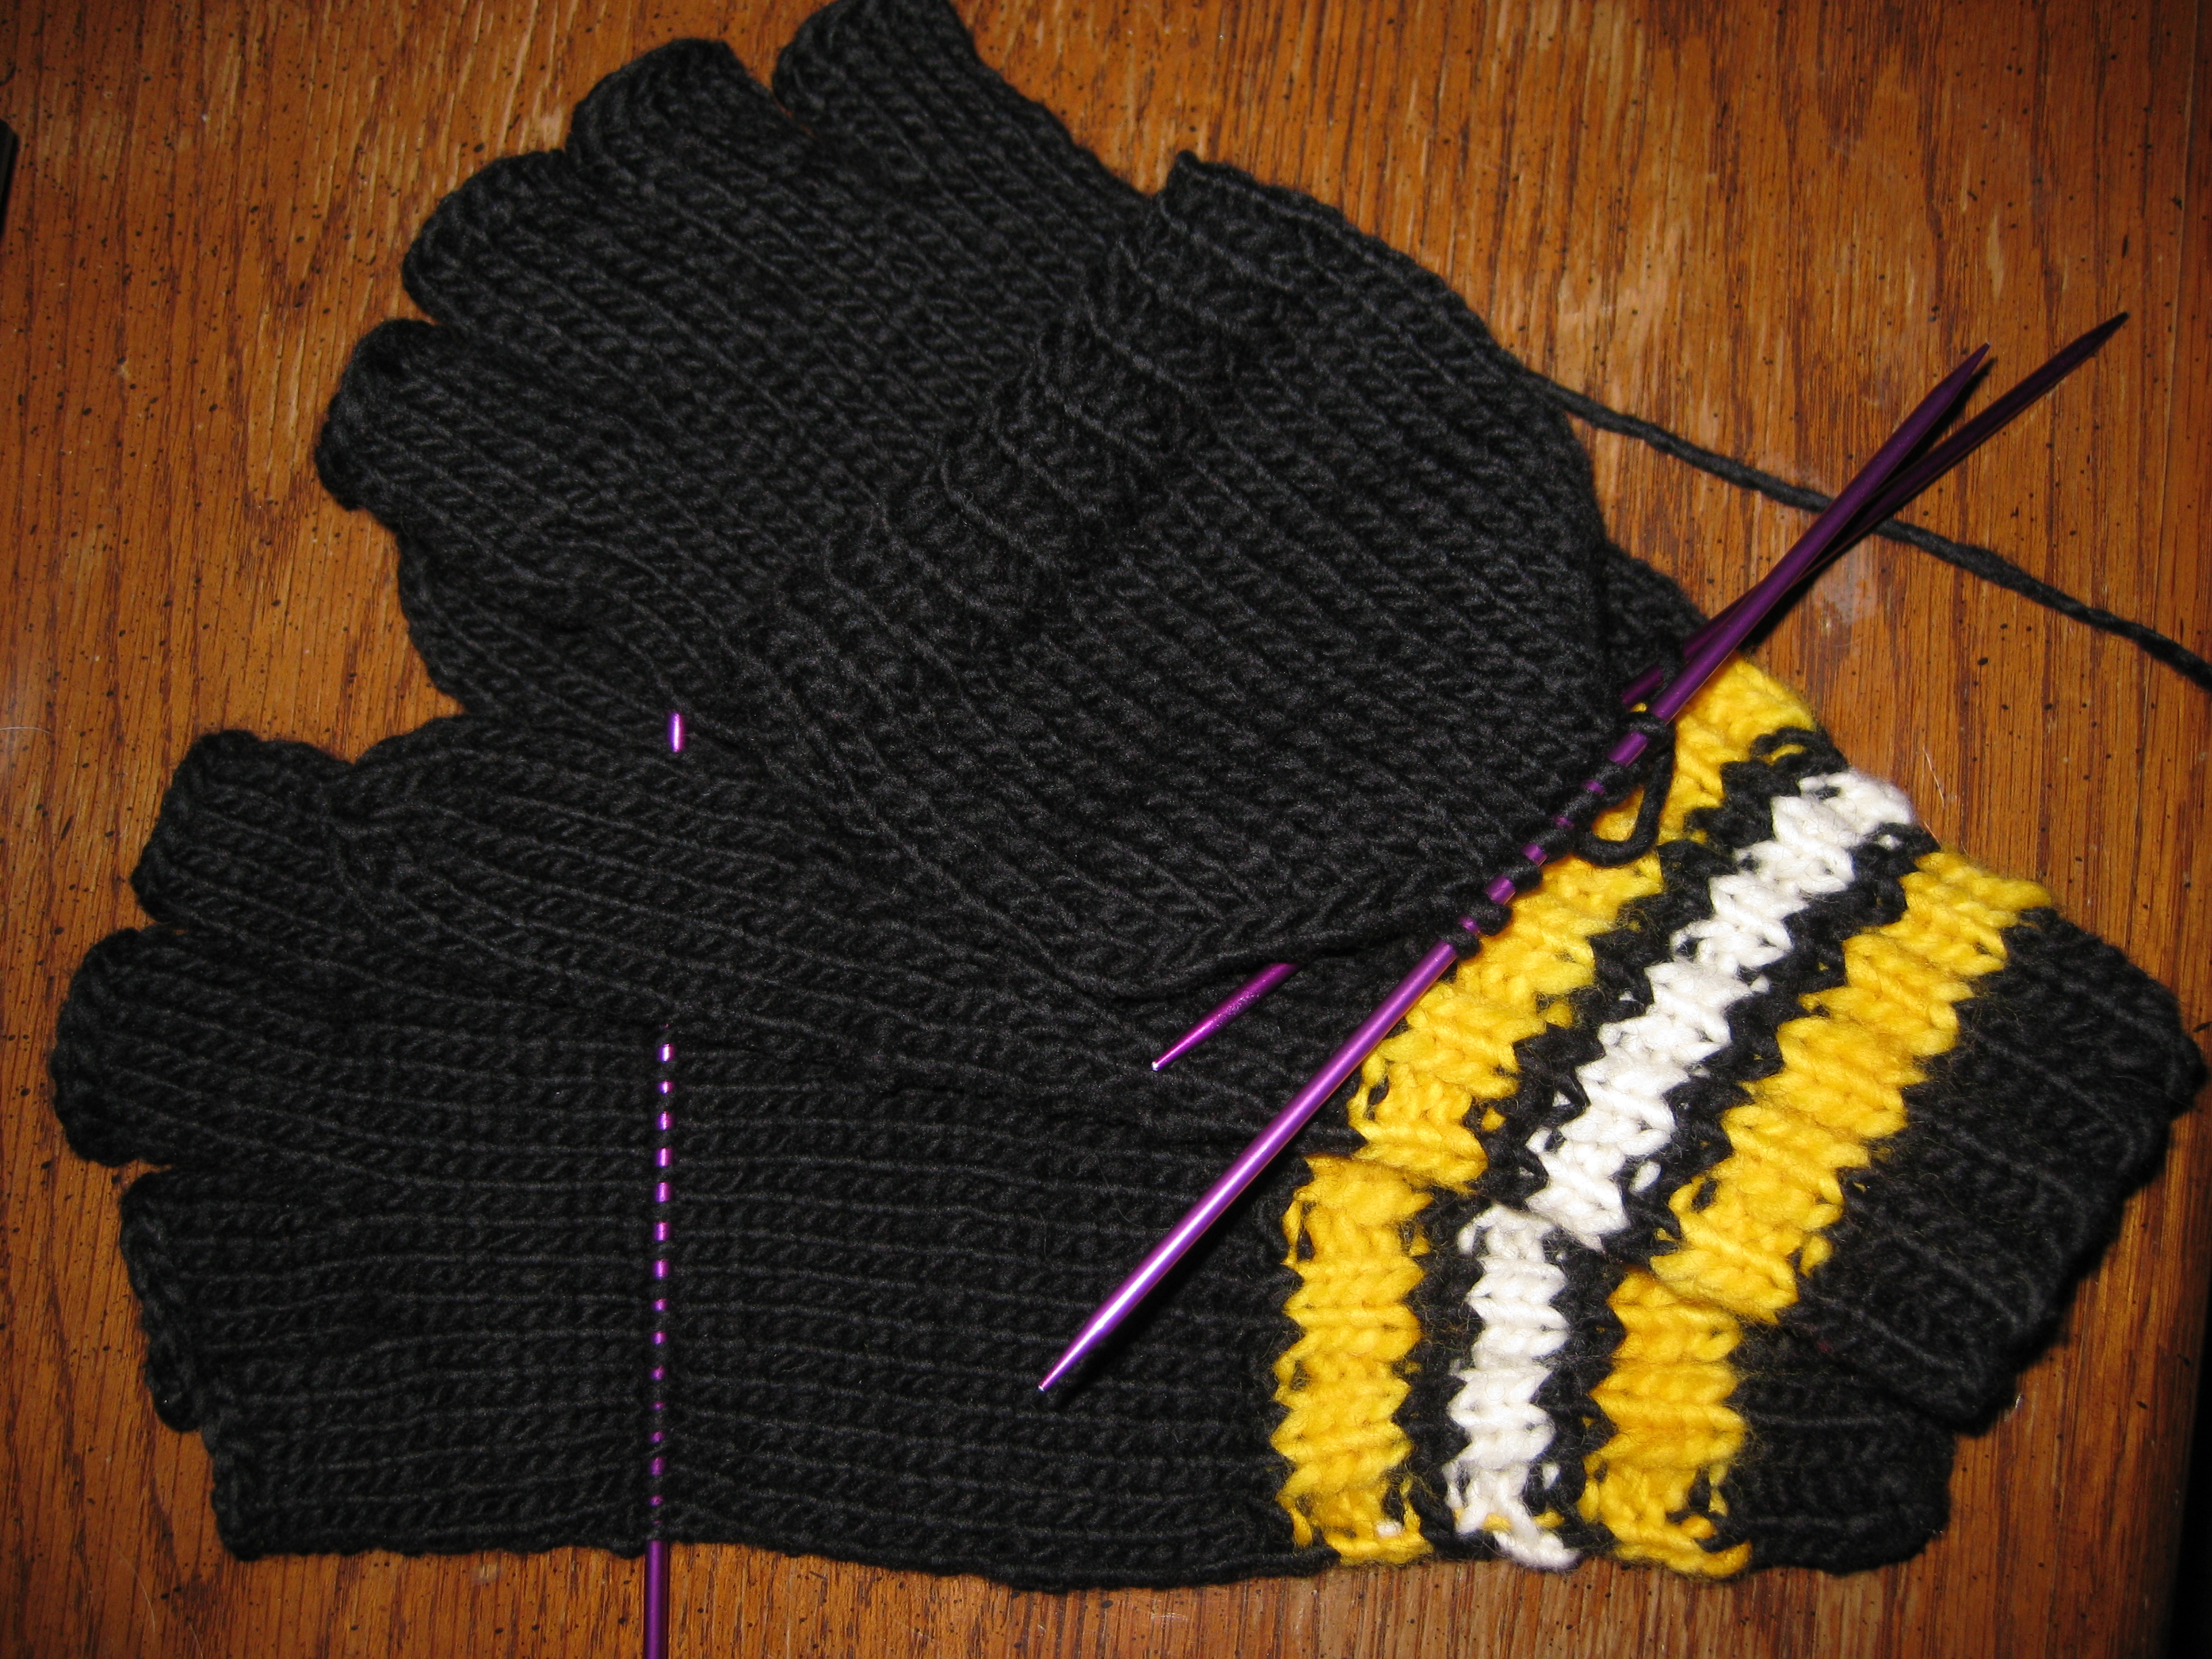 The Knitting Club | Just another blog about some obsessed knitters.